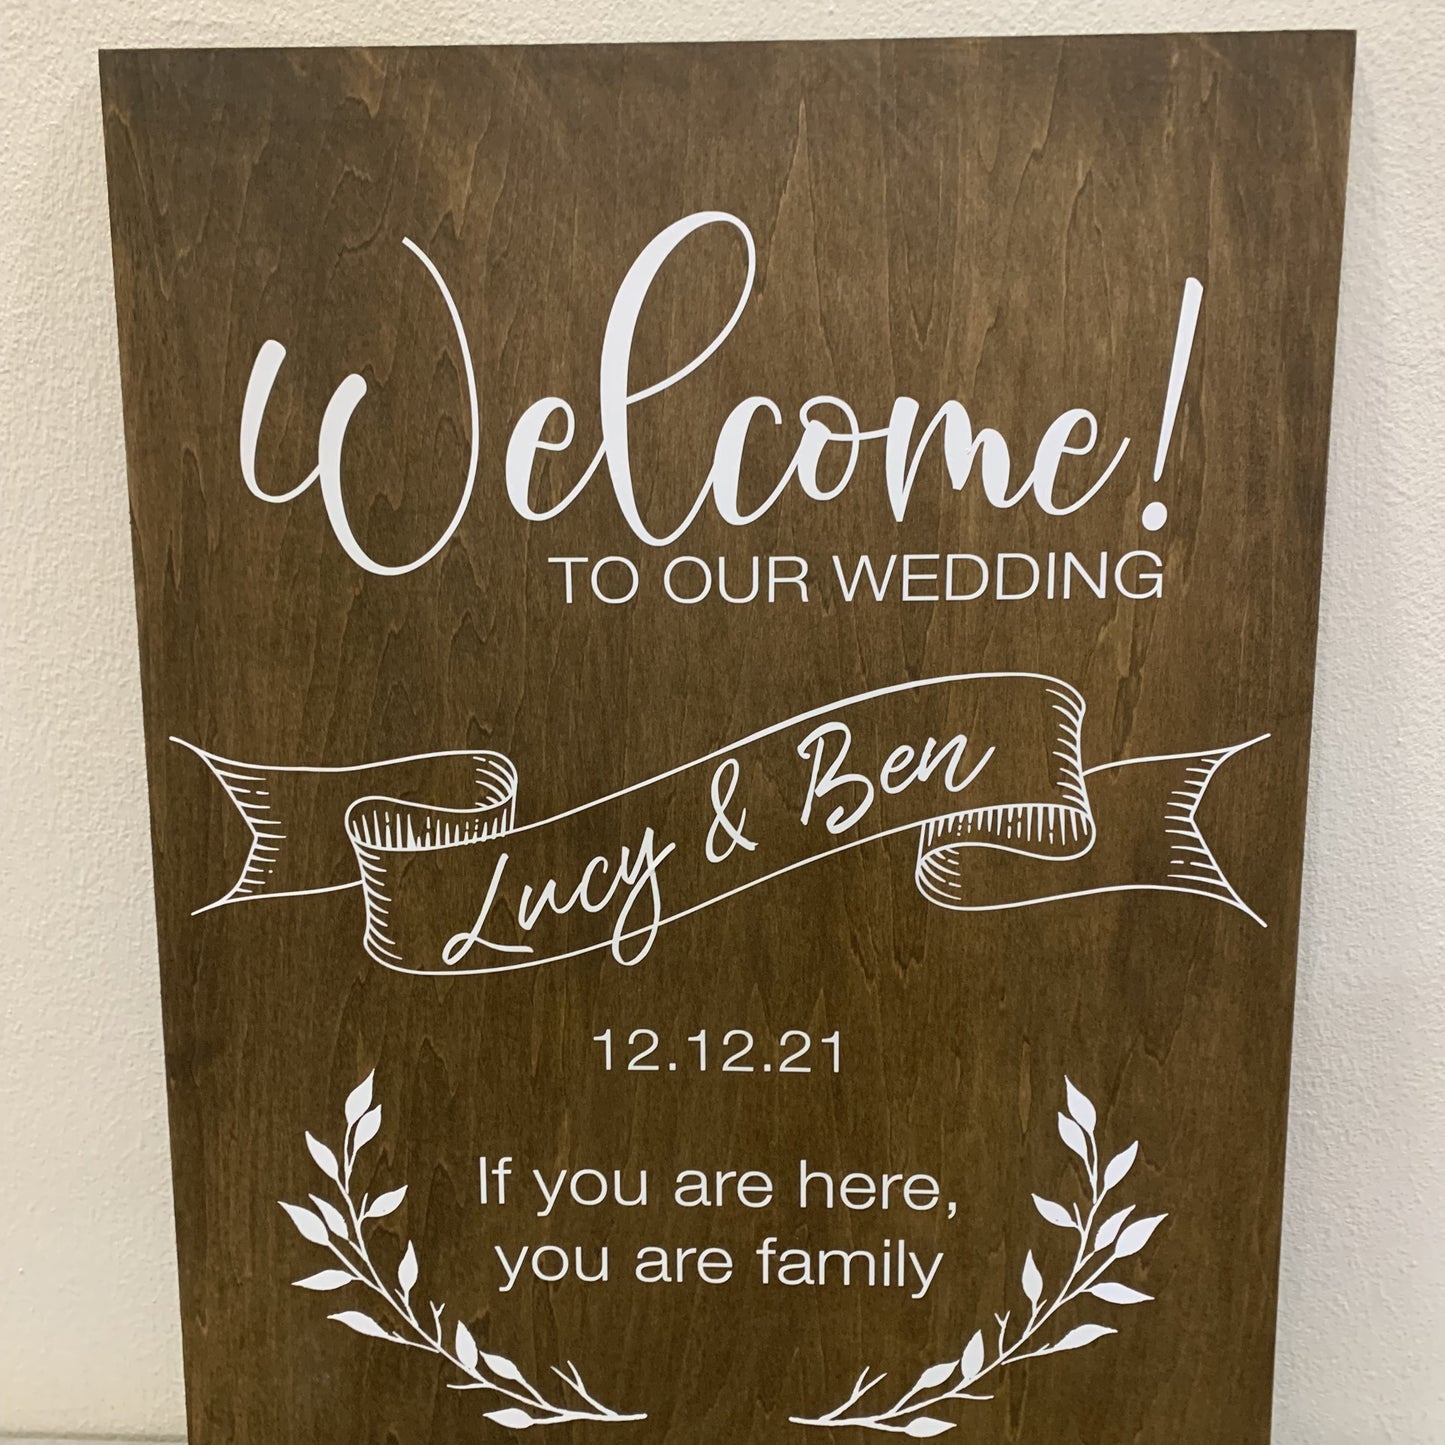 Wooden Board Sign A3 Size